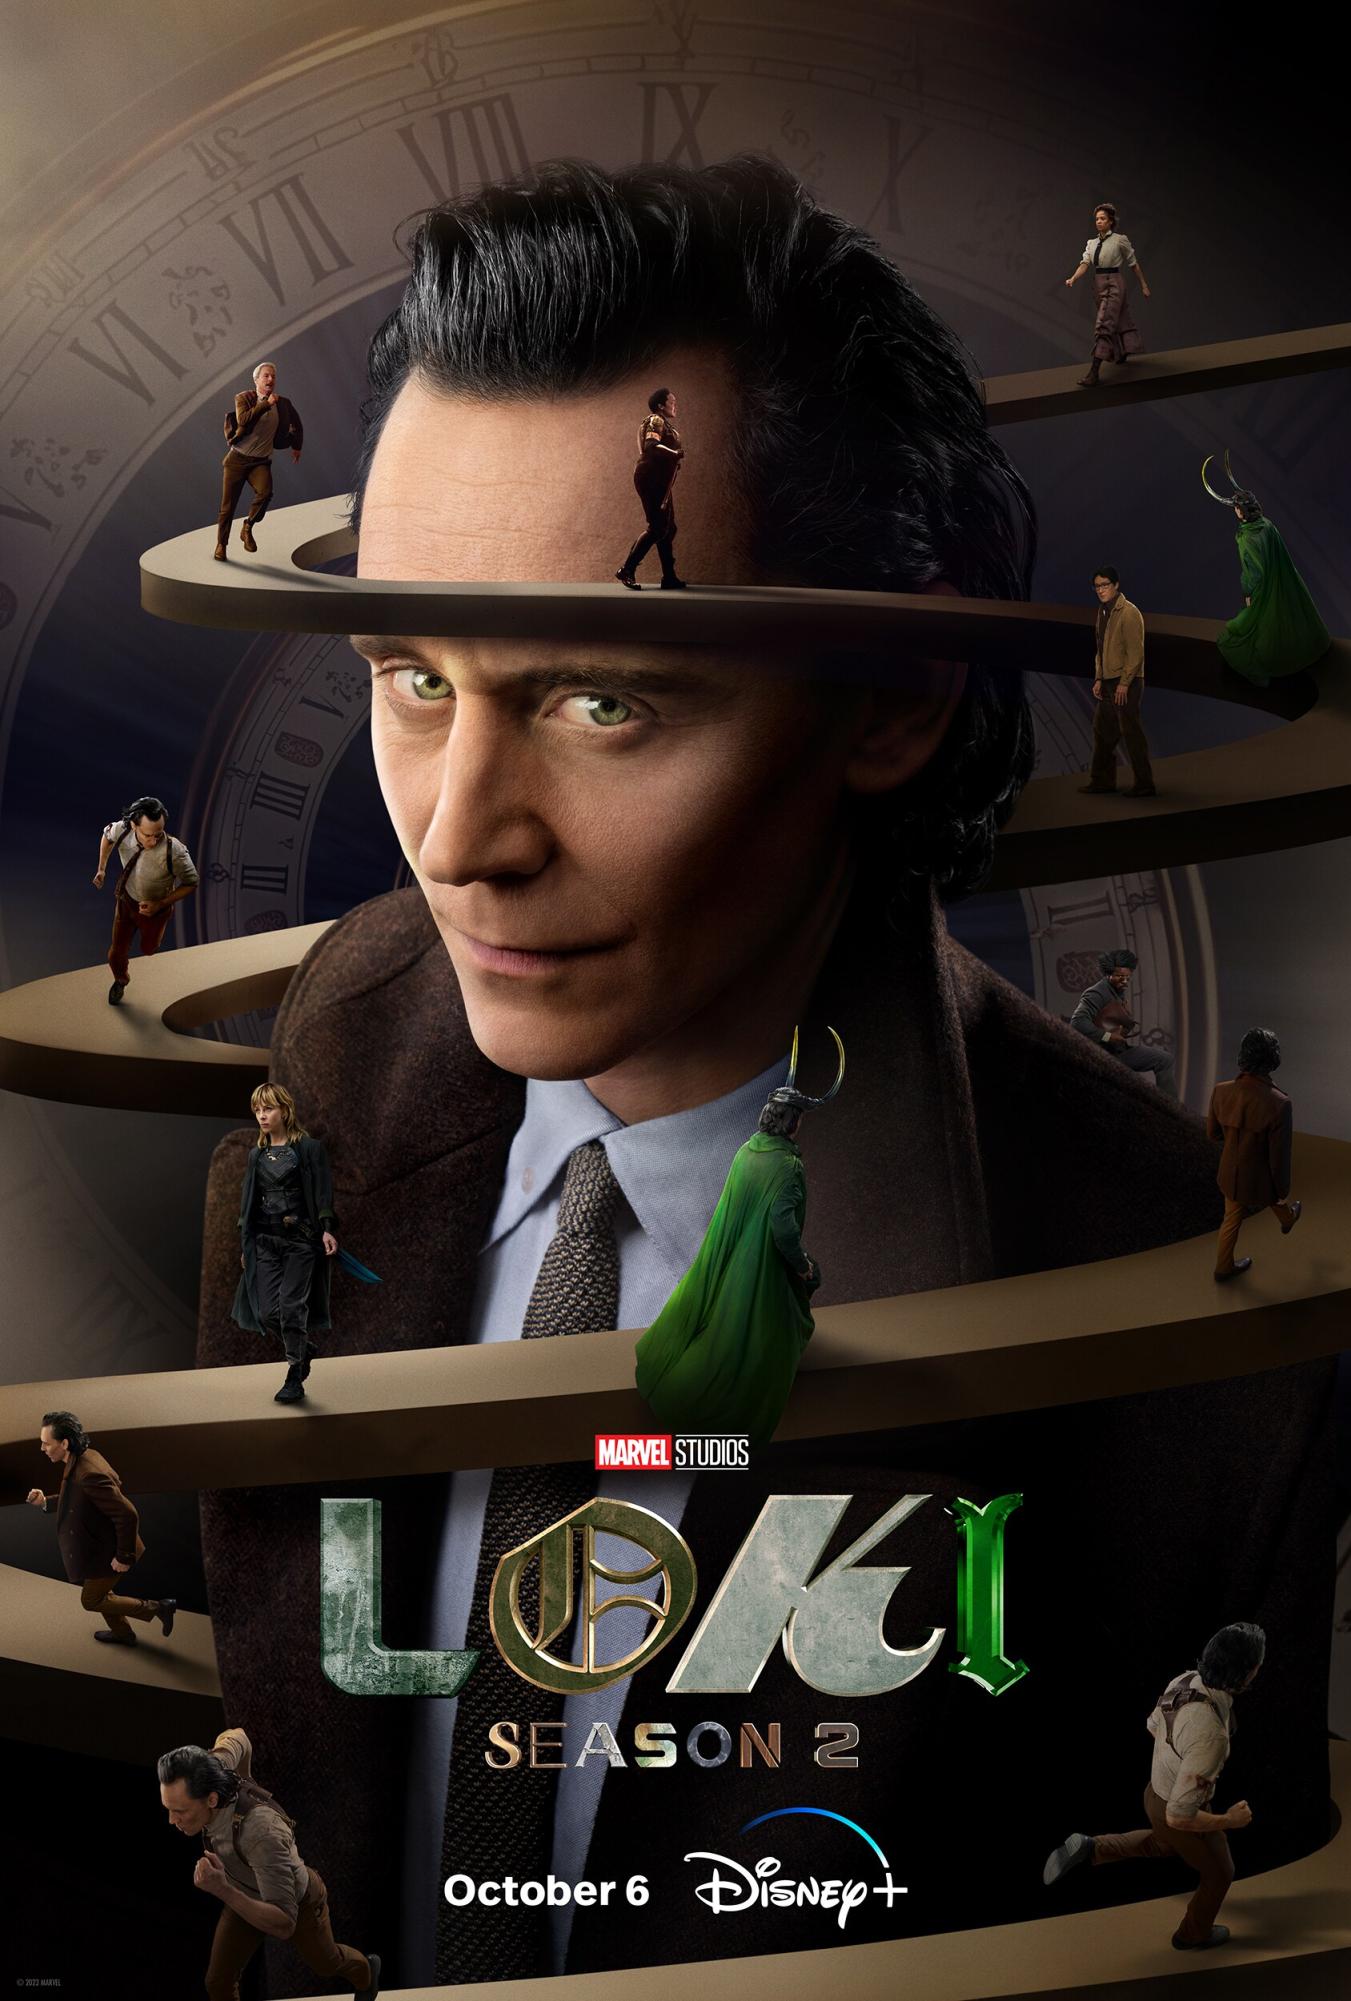 Season two of “Loki” leaves viewers with their jaws dropped after every episode. (Photo courtesy of Marvel Studios)